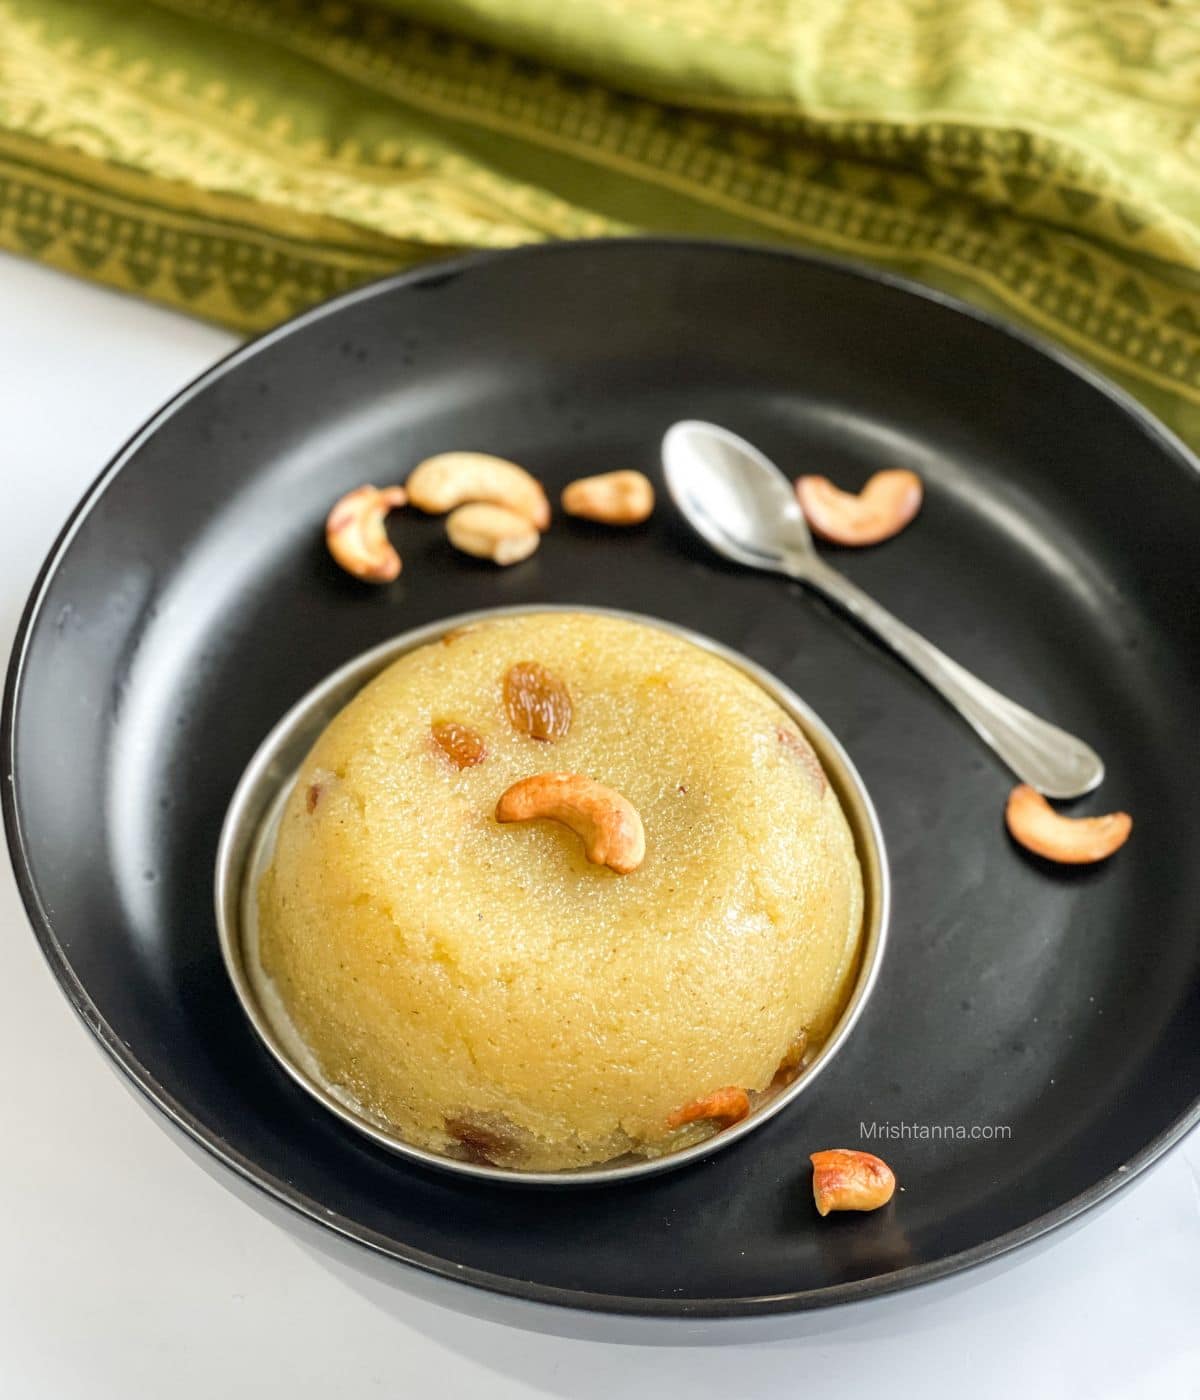 A bowl of rava kesari is on the plate with a spoon.